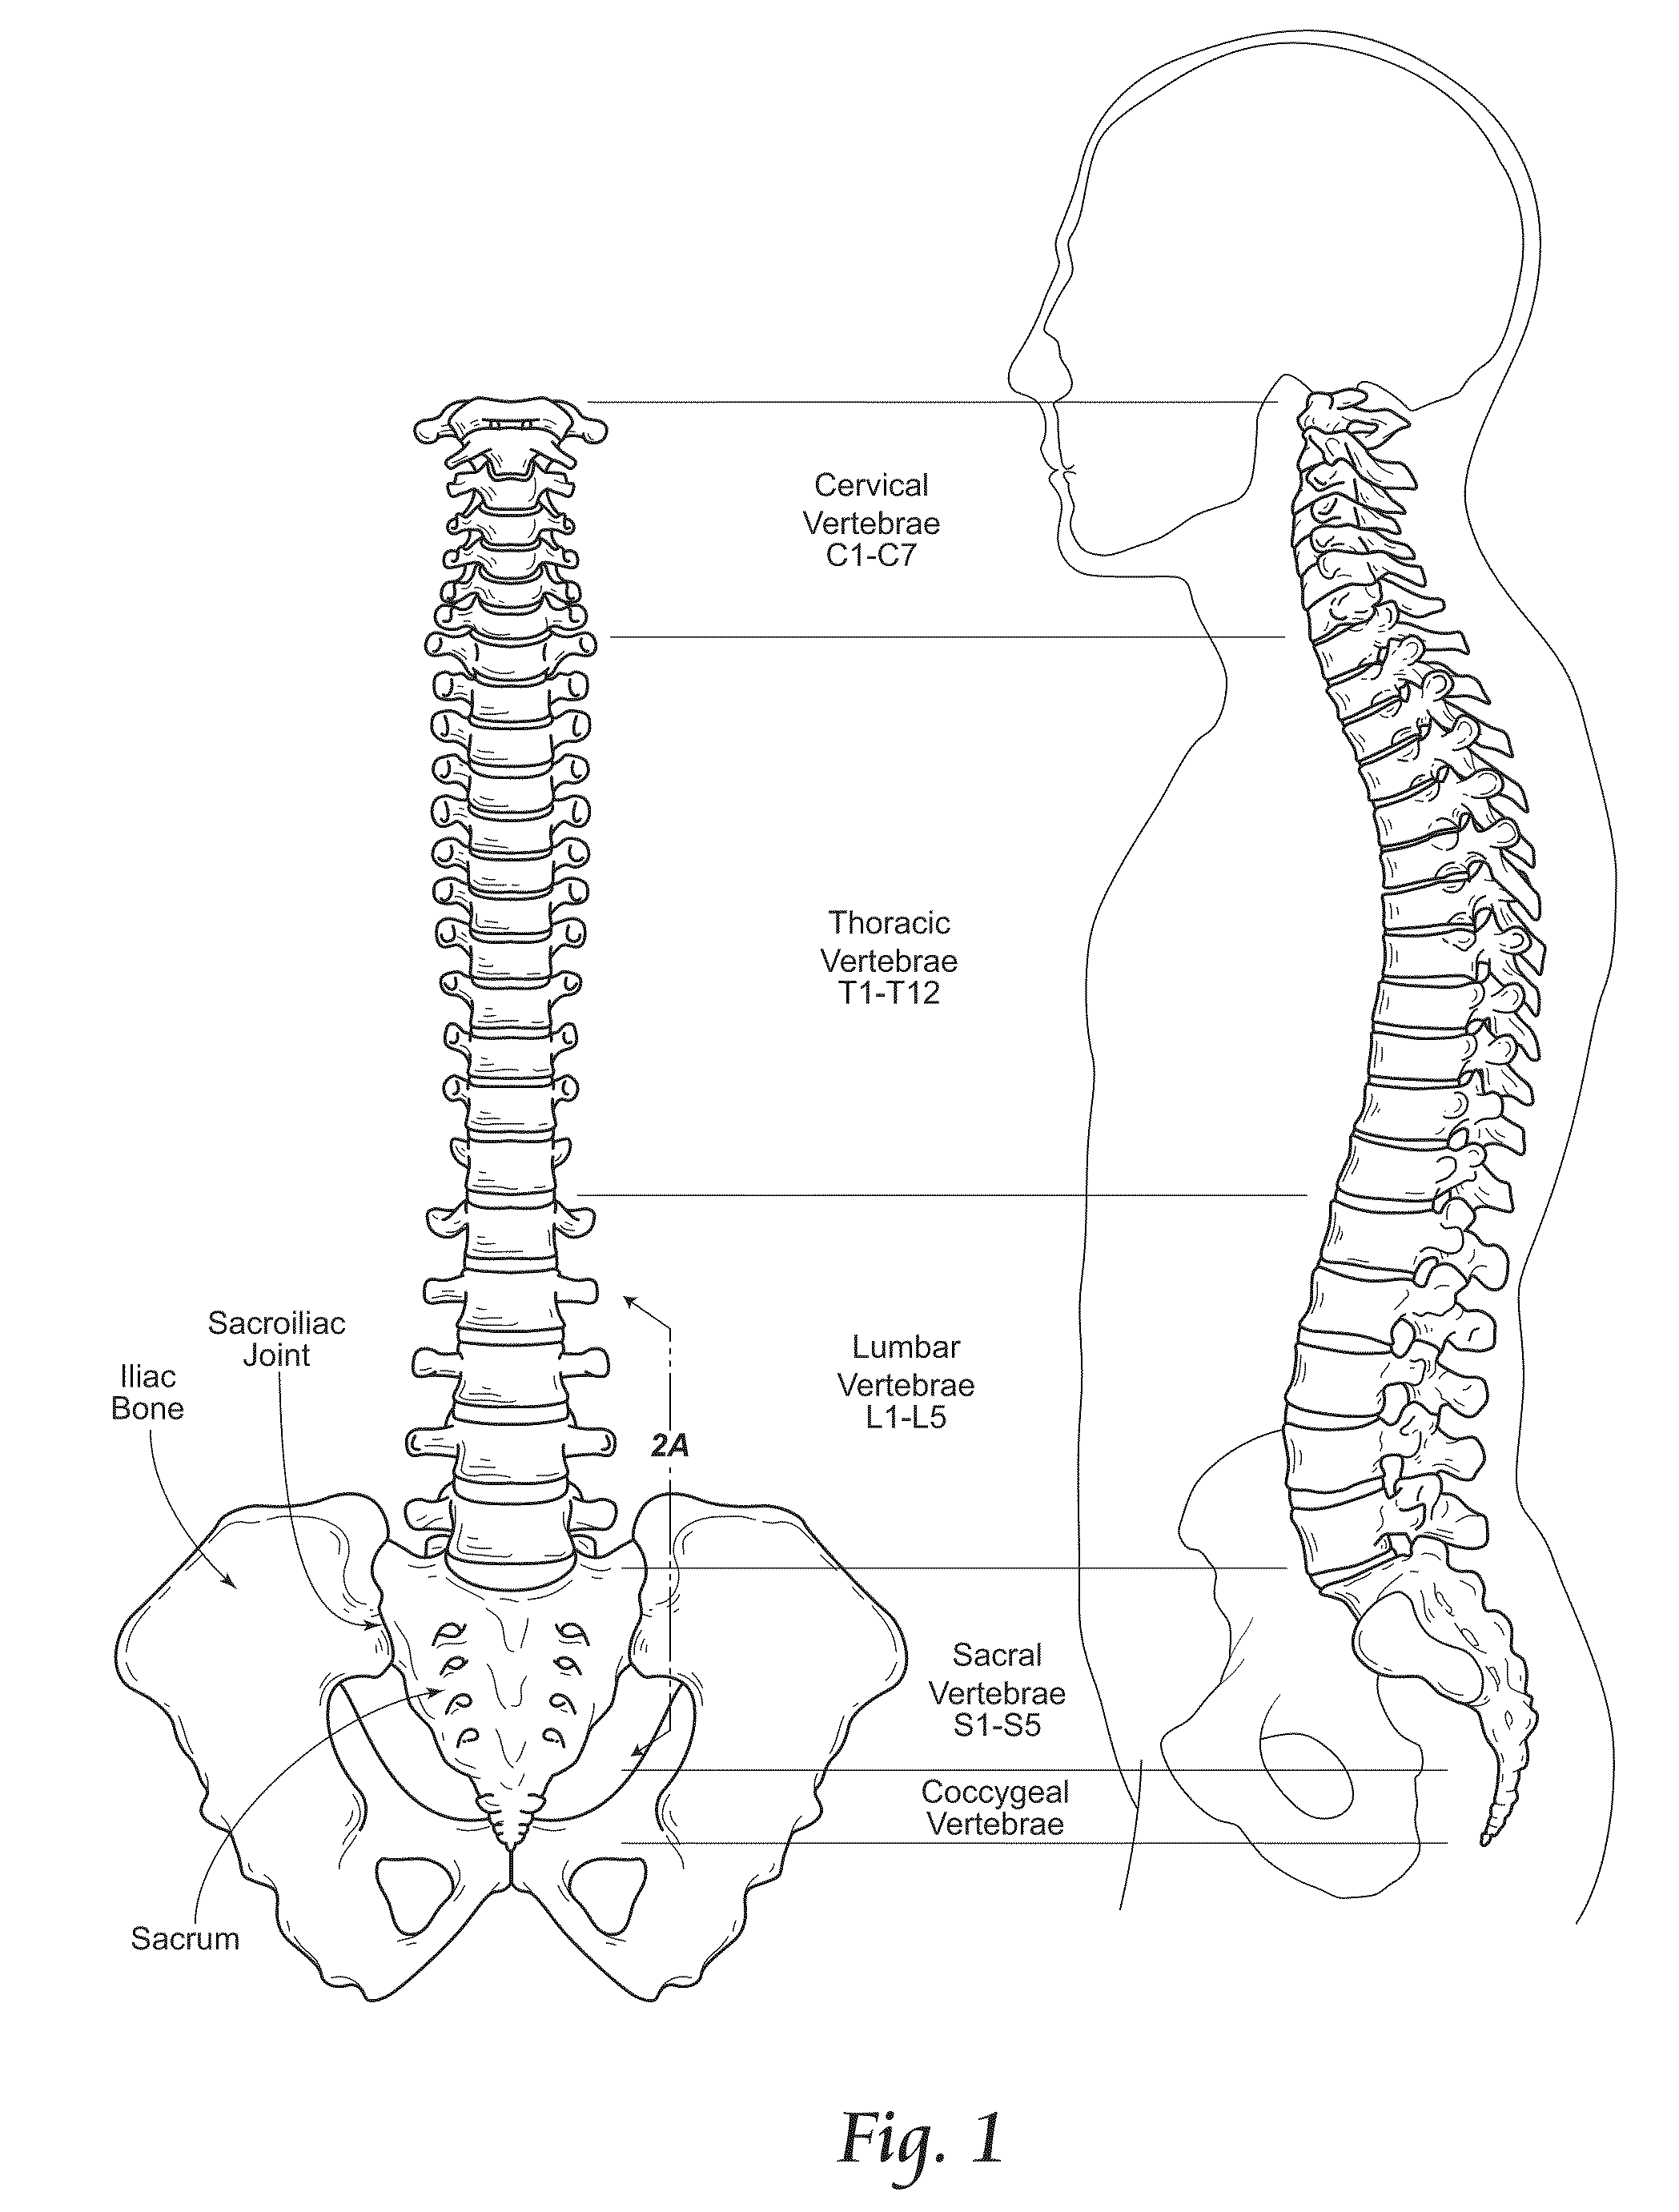 Minimally invasive systems, devices, and surgical methods for performing arthrodesis in the spine